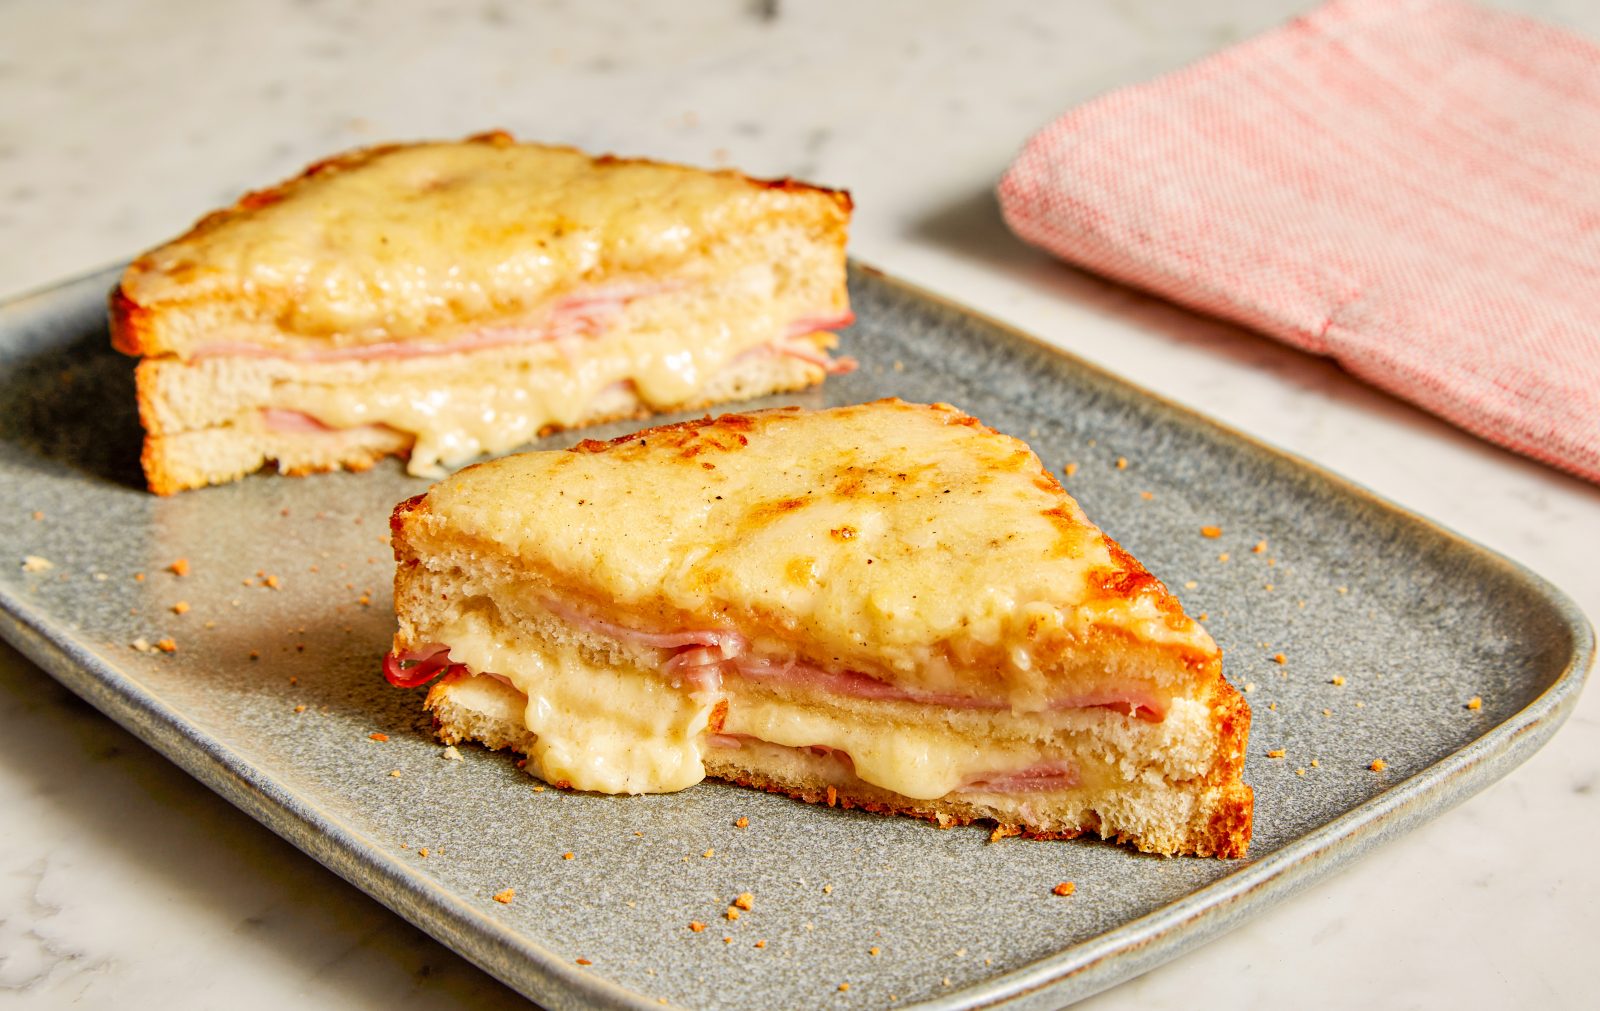 Oven Baked Three Layer Croque Monsieur Sandwich